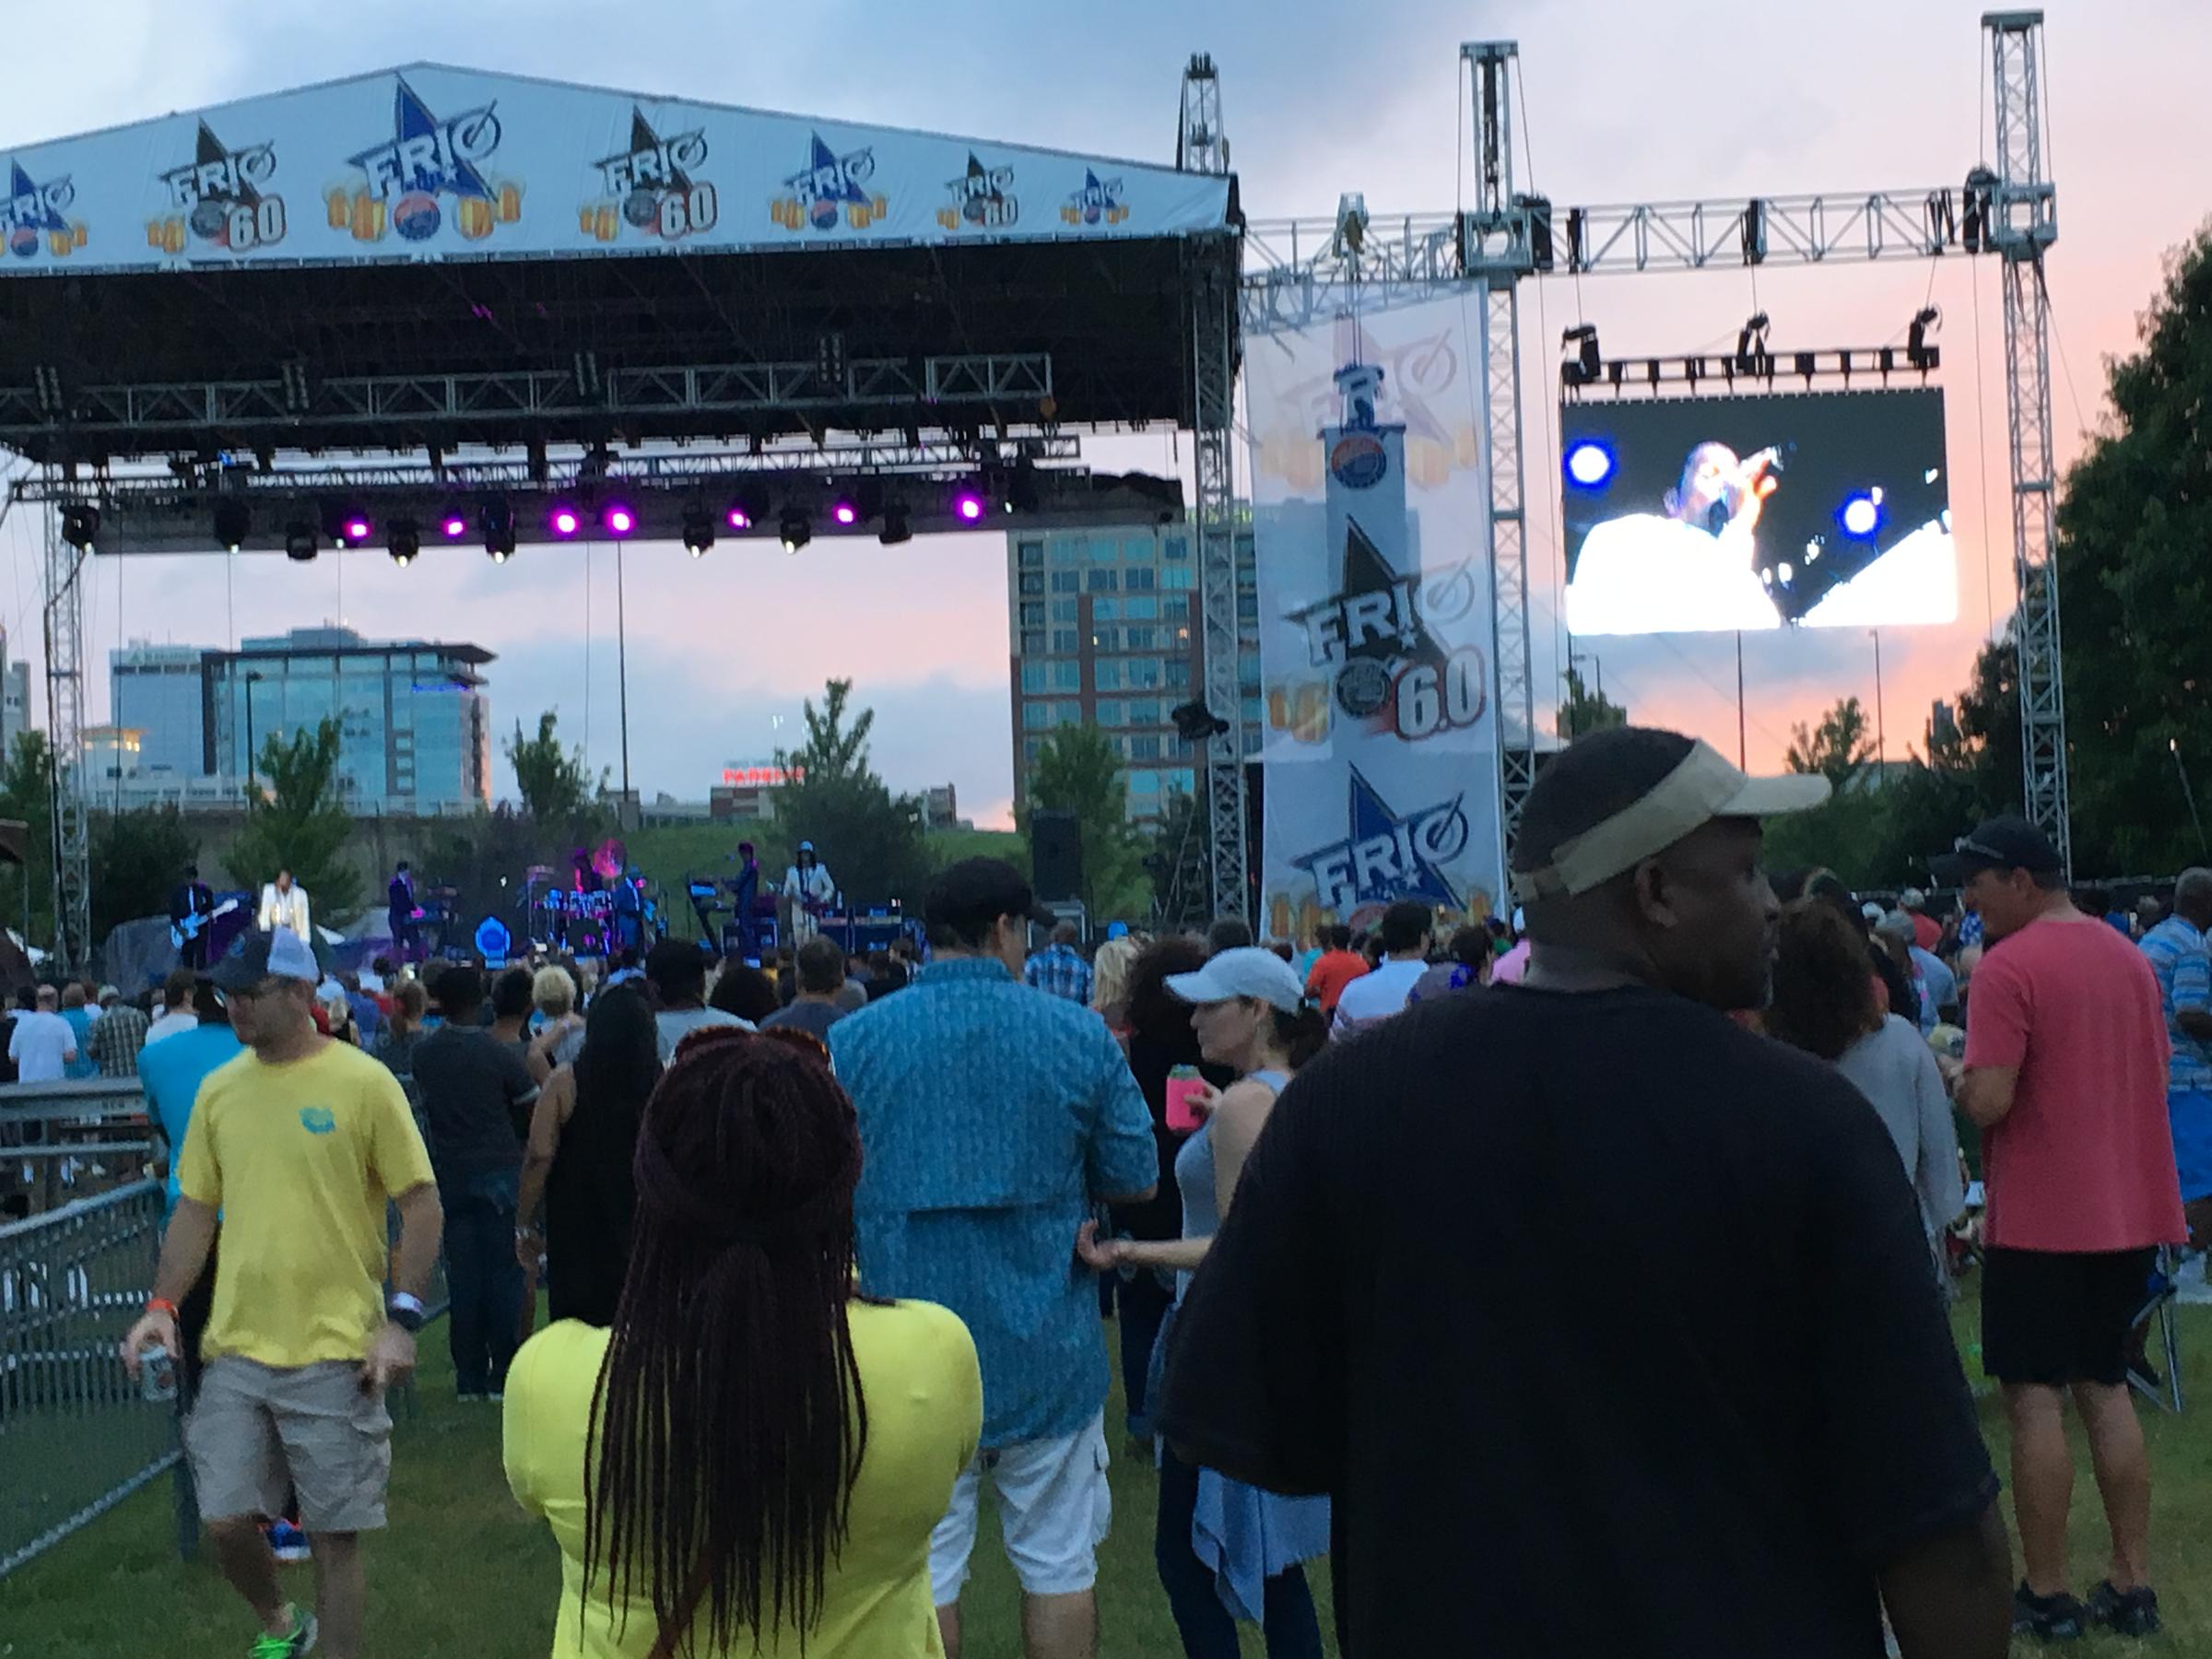 Riverfest Suspending Annual Event After 40 Years In Little Rock KUAR